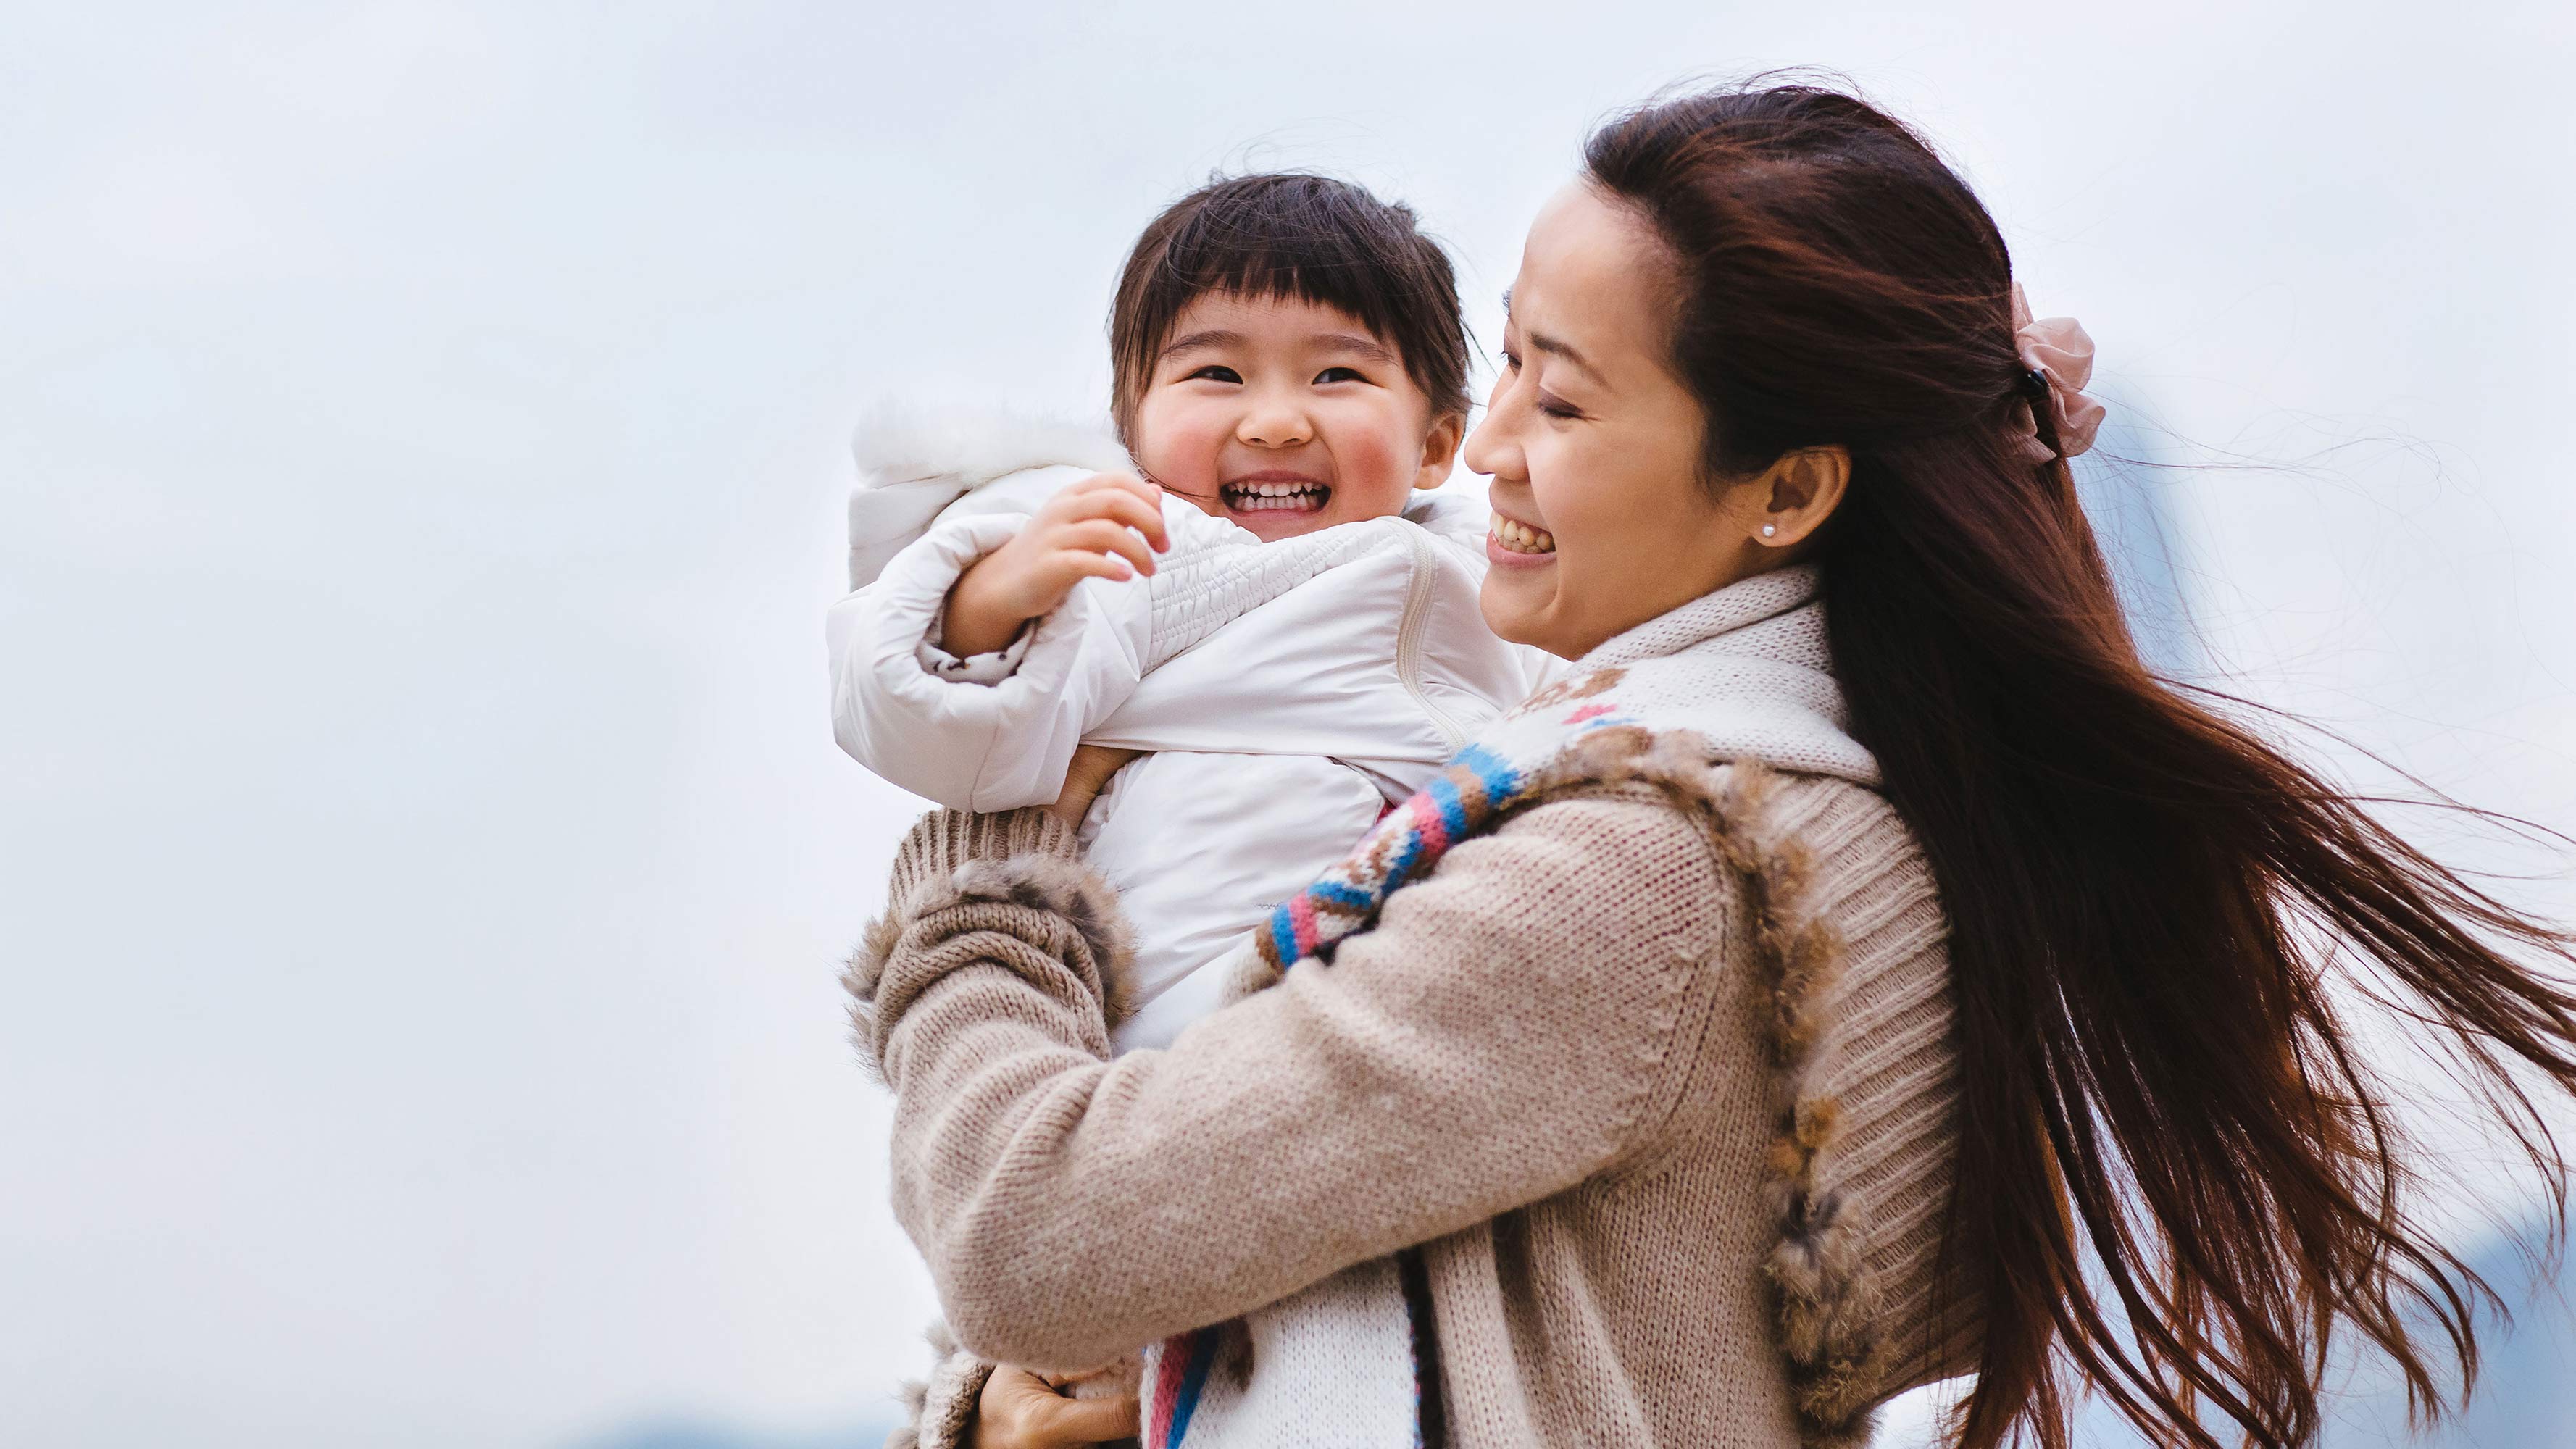 A mother, holding her infant daughter, smile and enjoy an outdoor adventure.